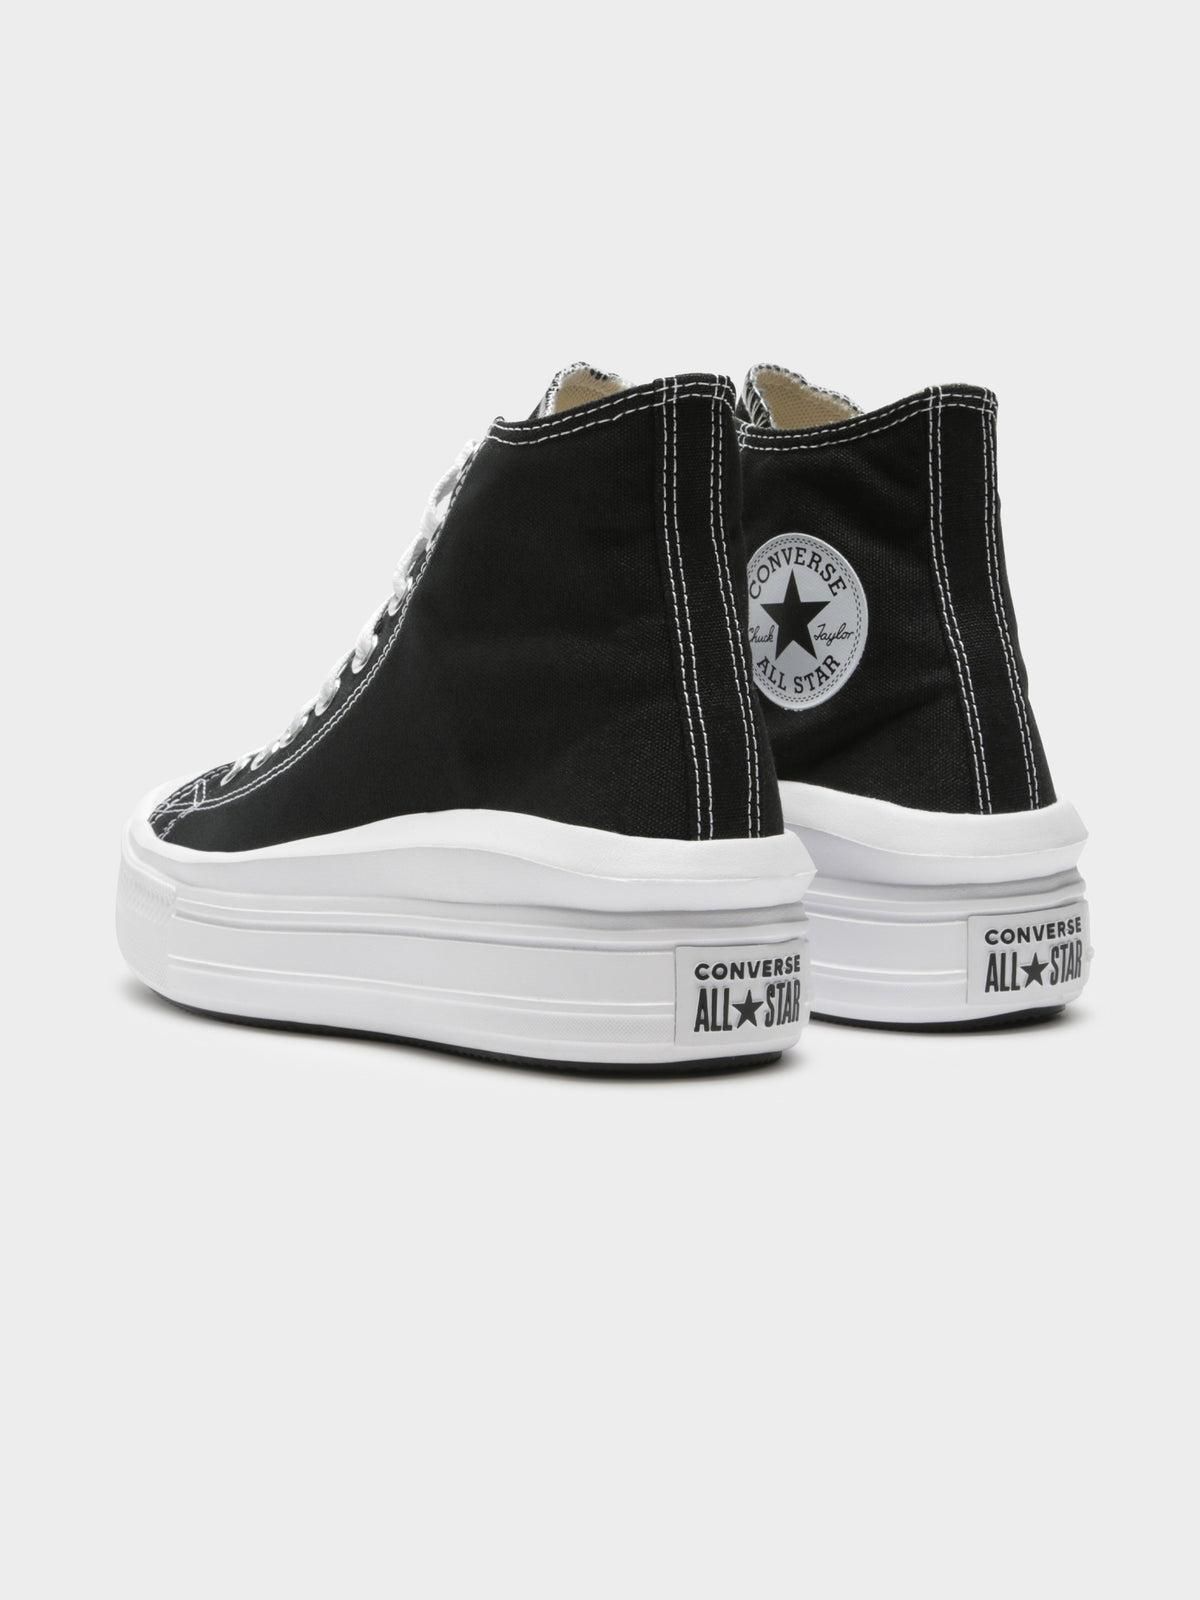 Womens Chuck Taylor Move Platform High Top Sneakers